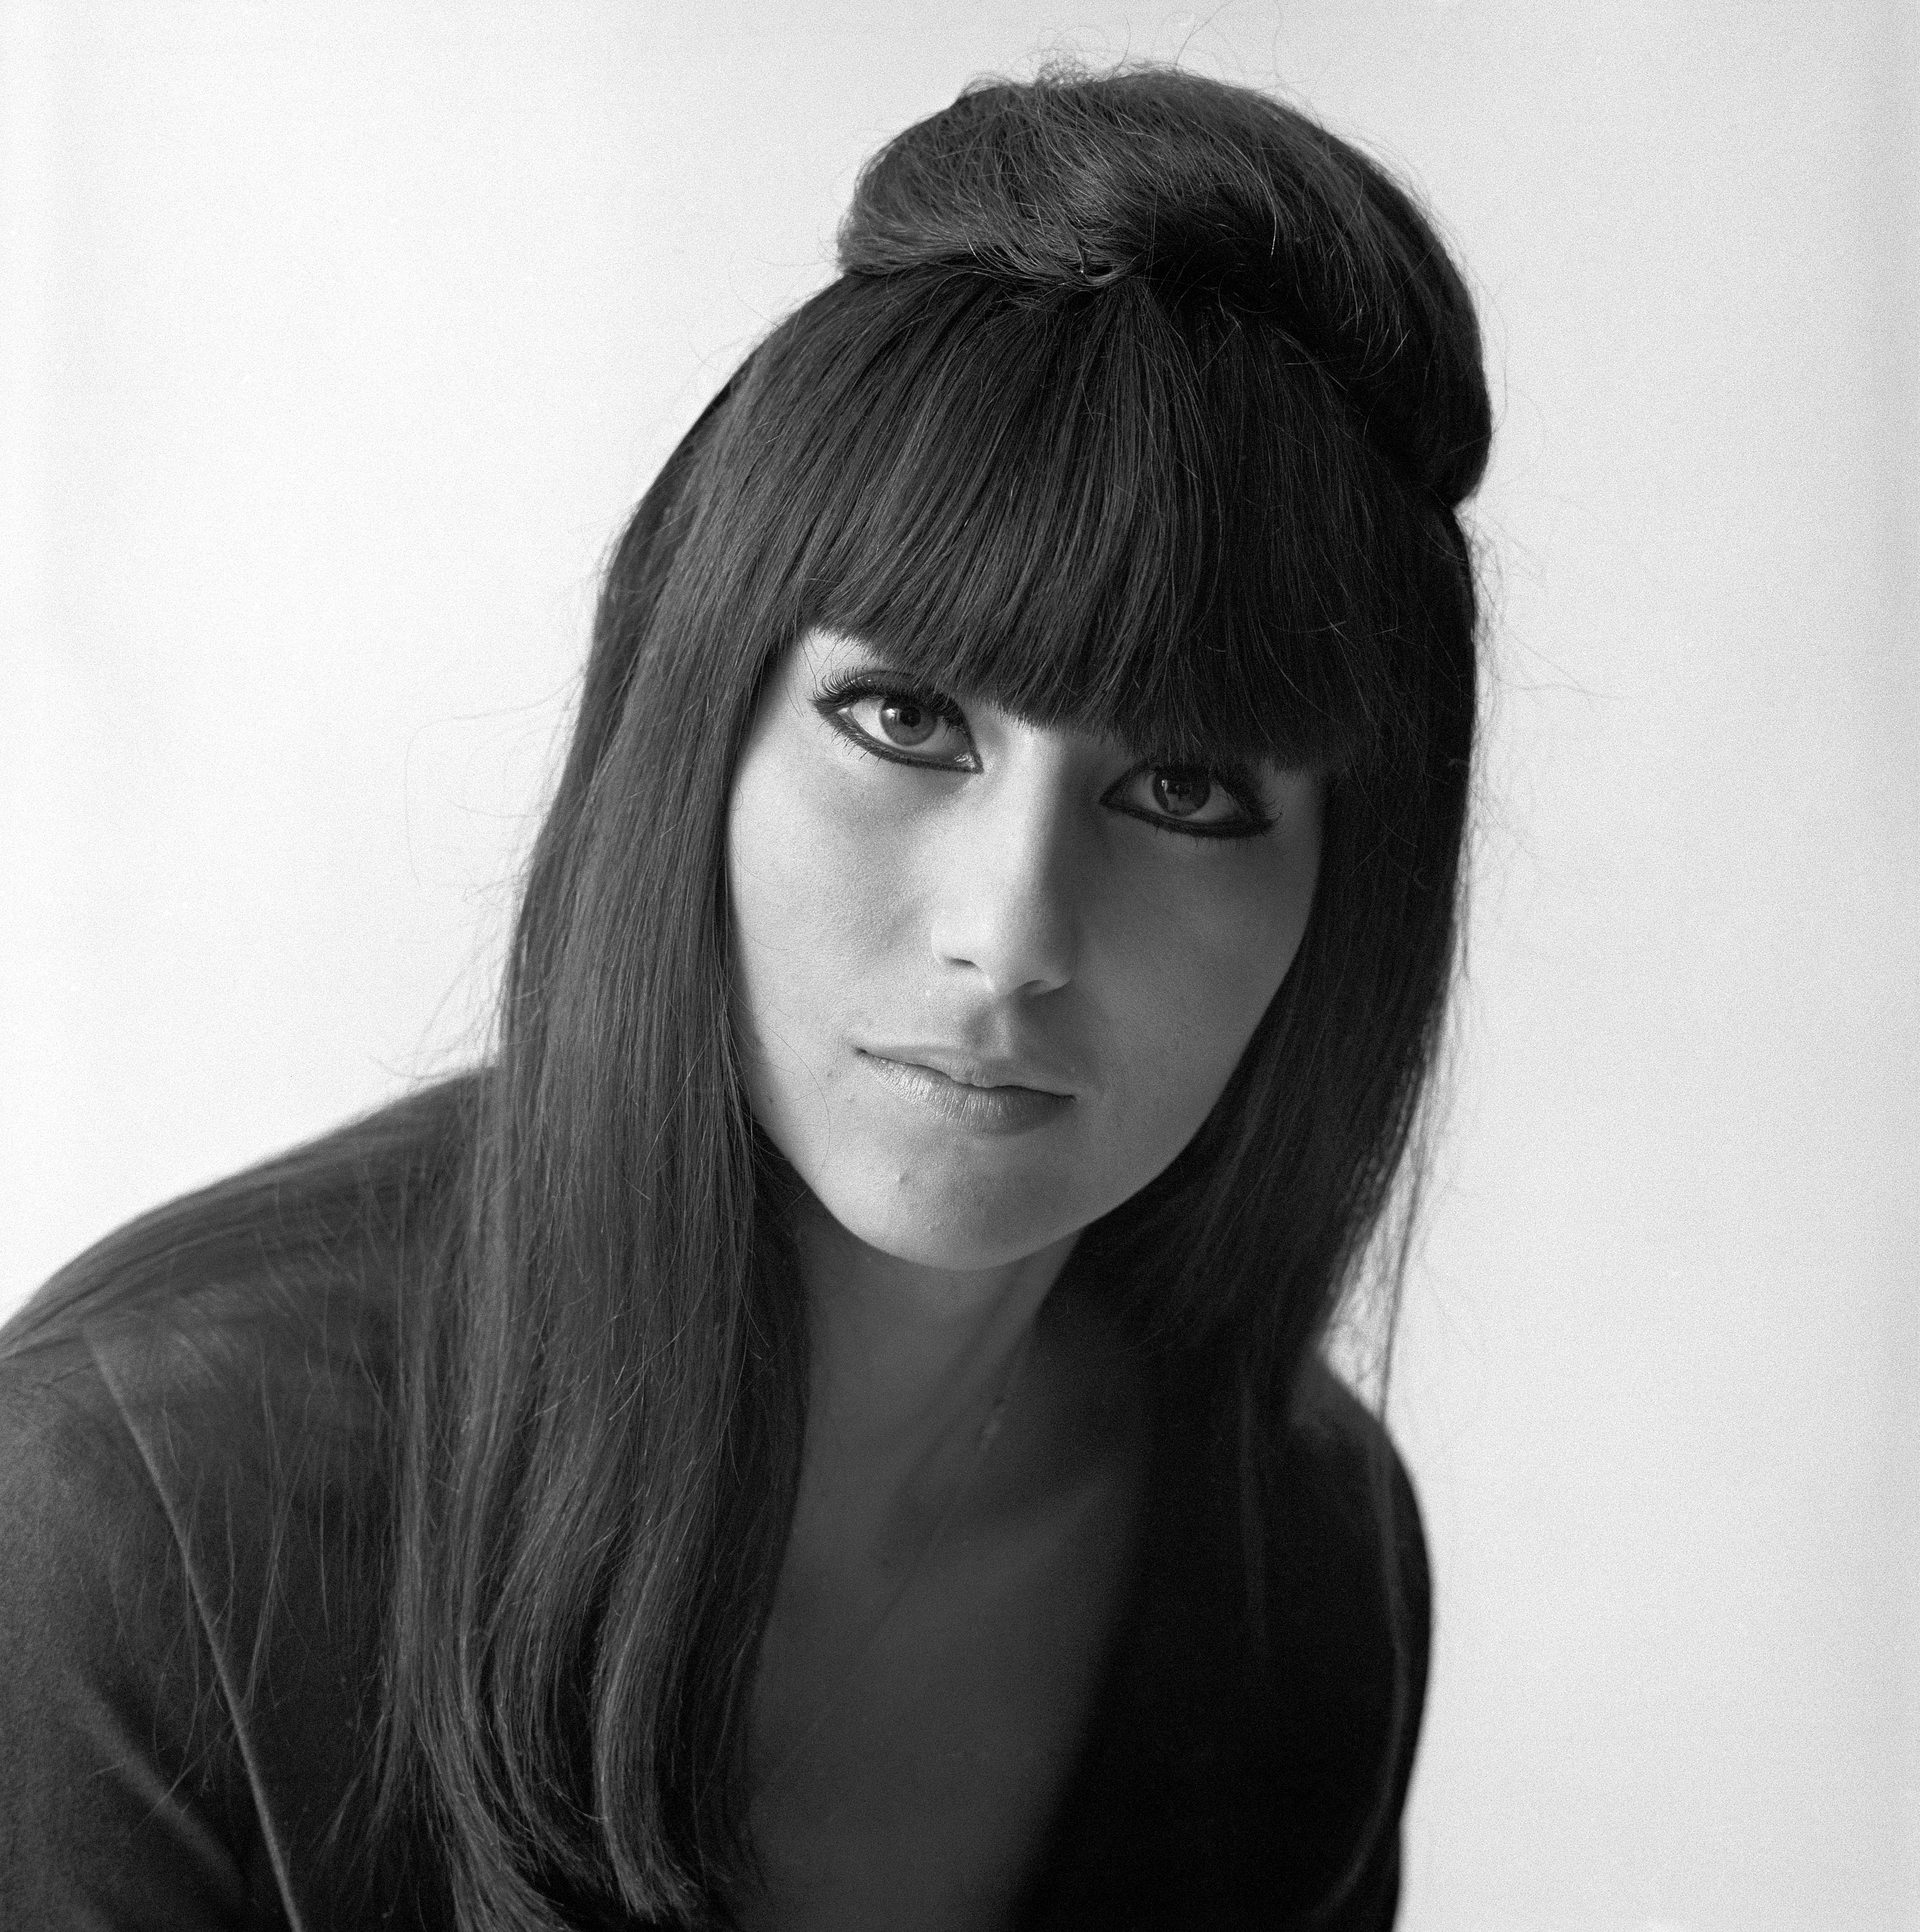 Cher poses for a portrait in October 1964 | Source: Getty Images